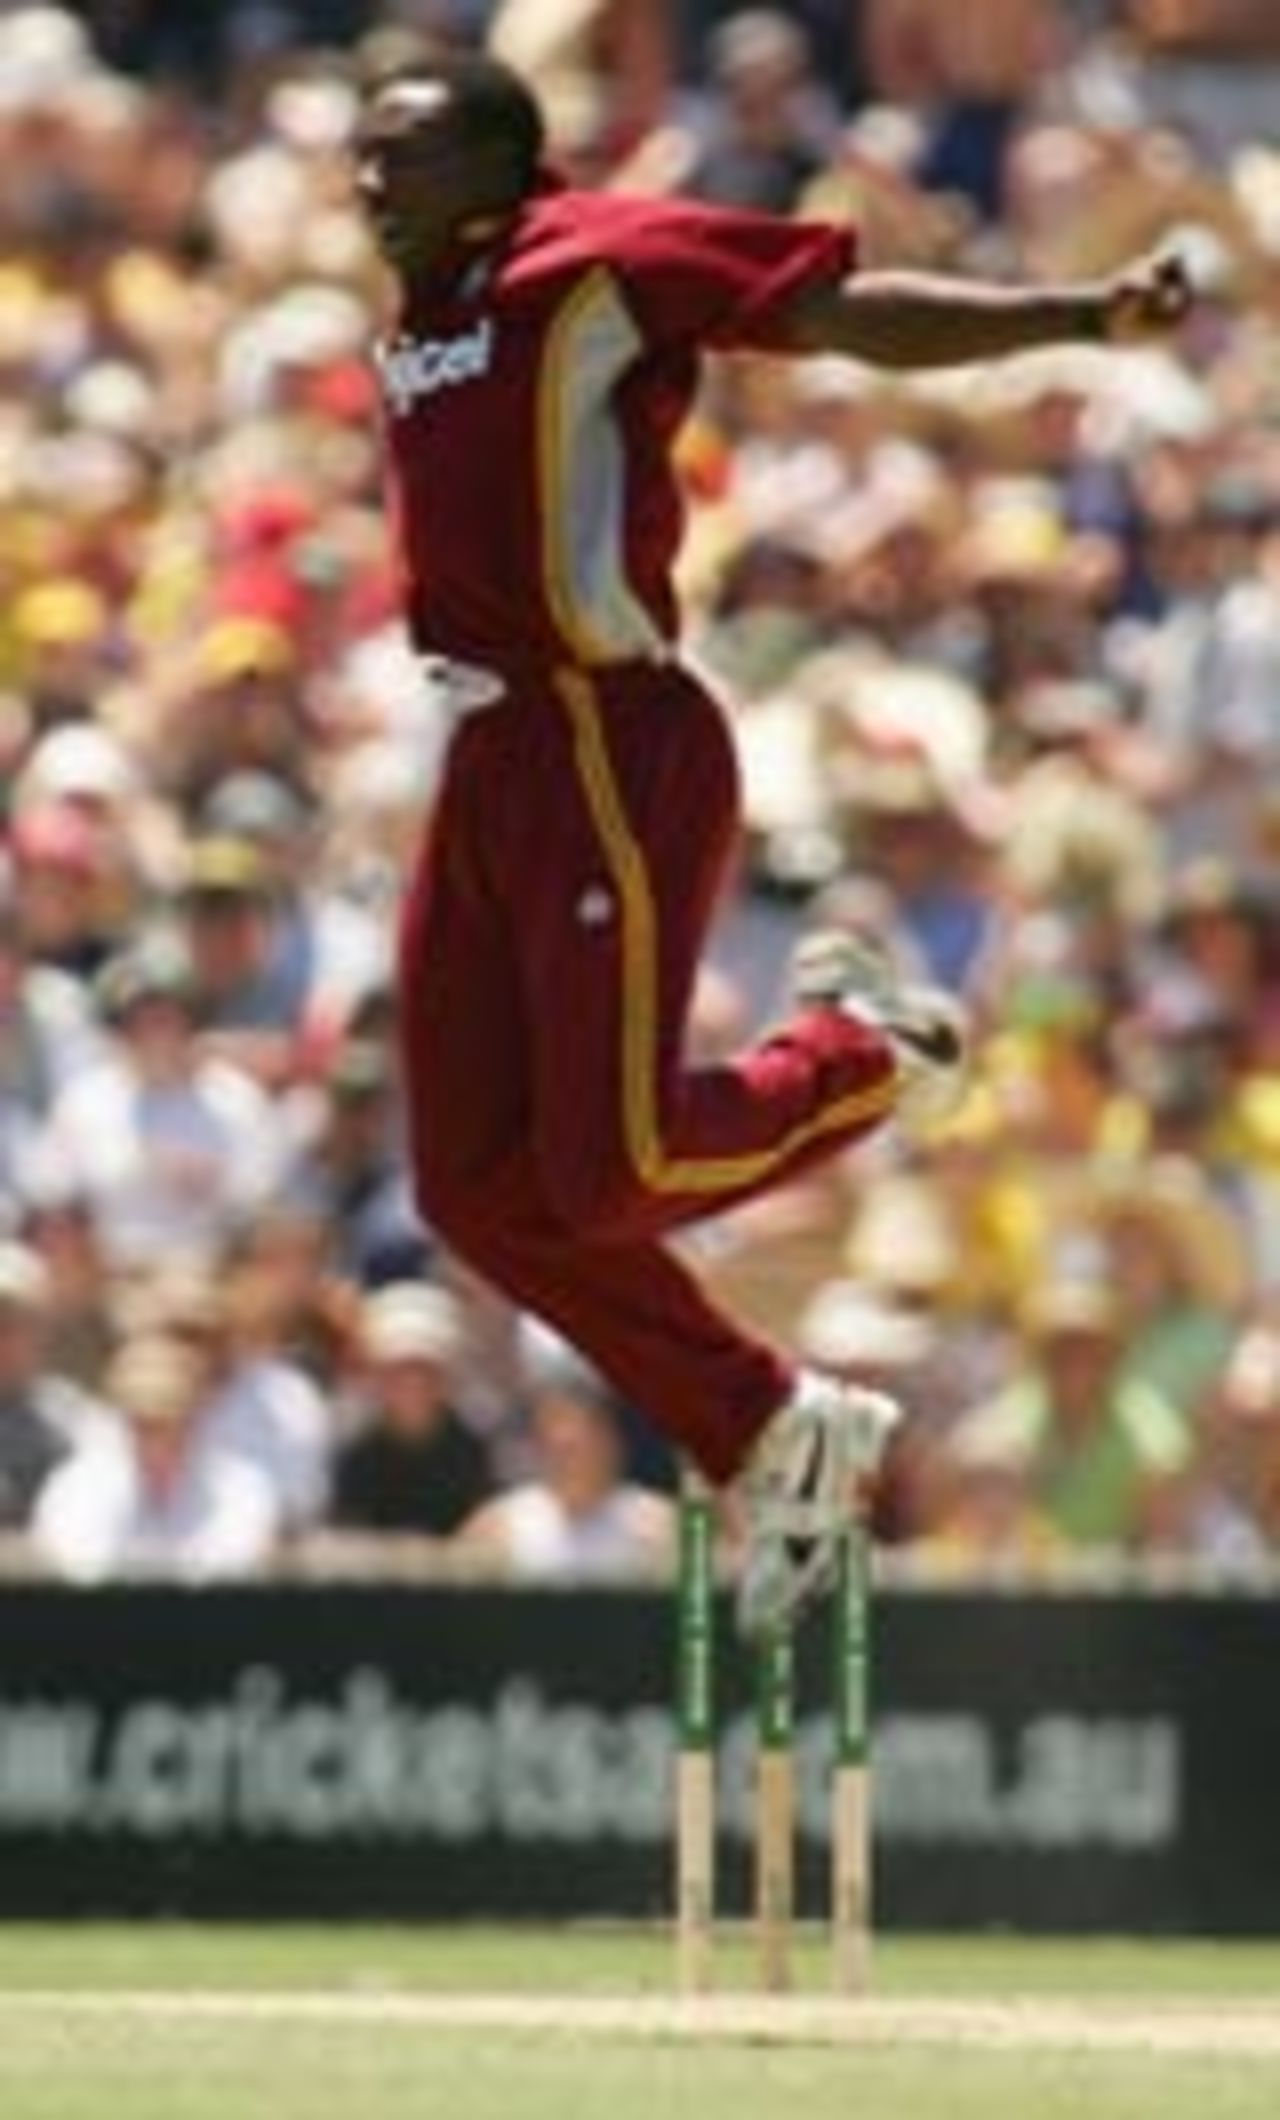 Pedro Collins leaps after picking up a wicket, Australia v West Indies, VB Series, Adelaide, January 26, 2005